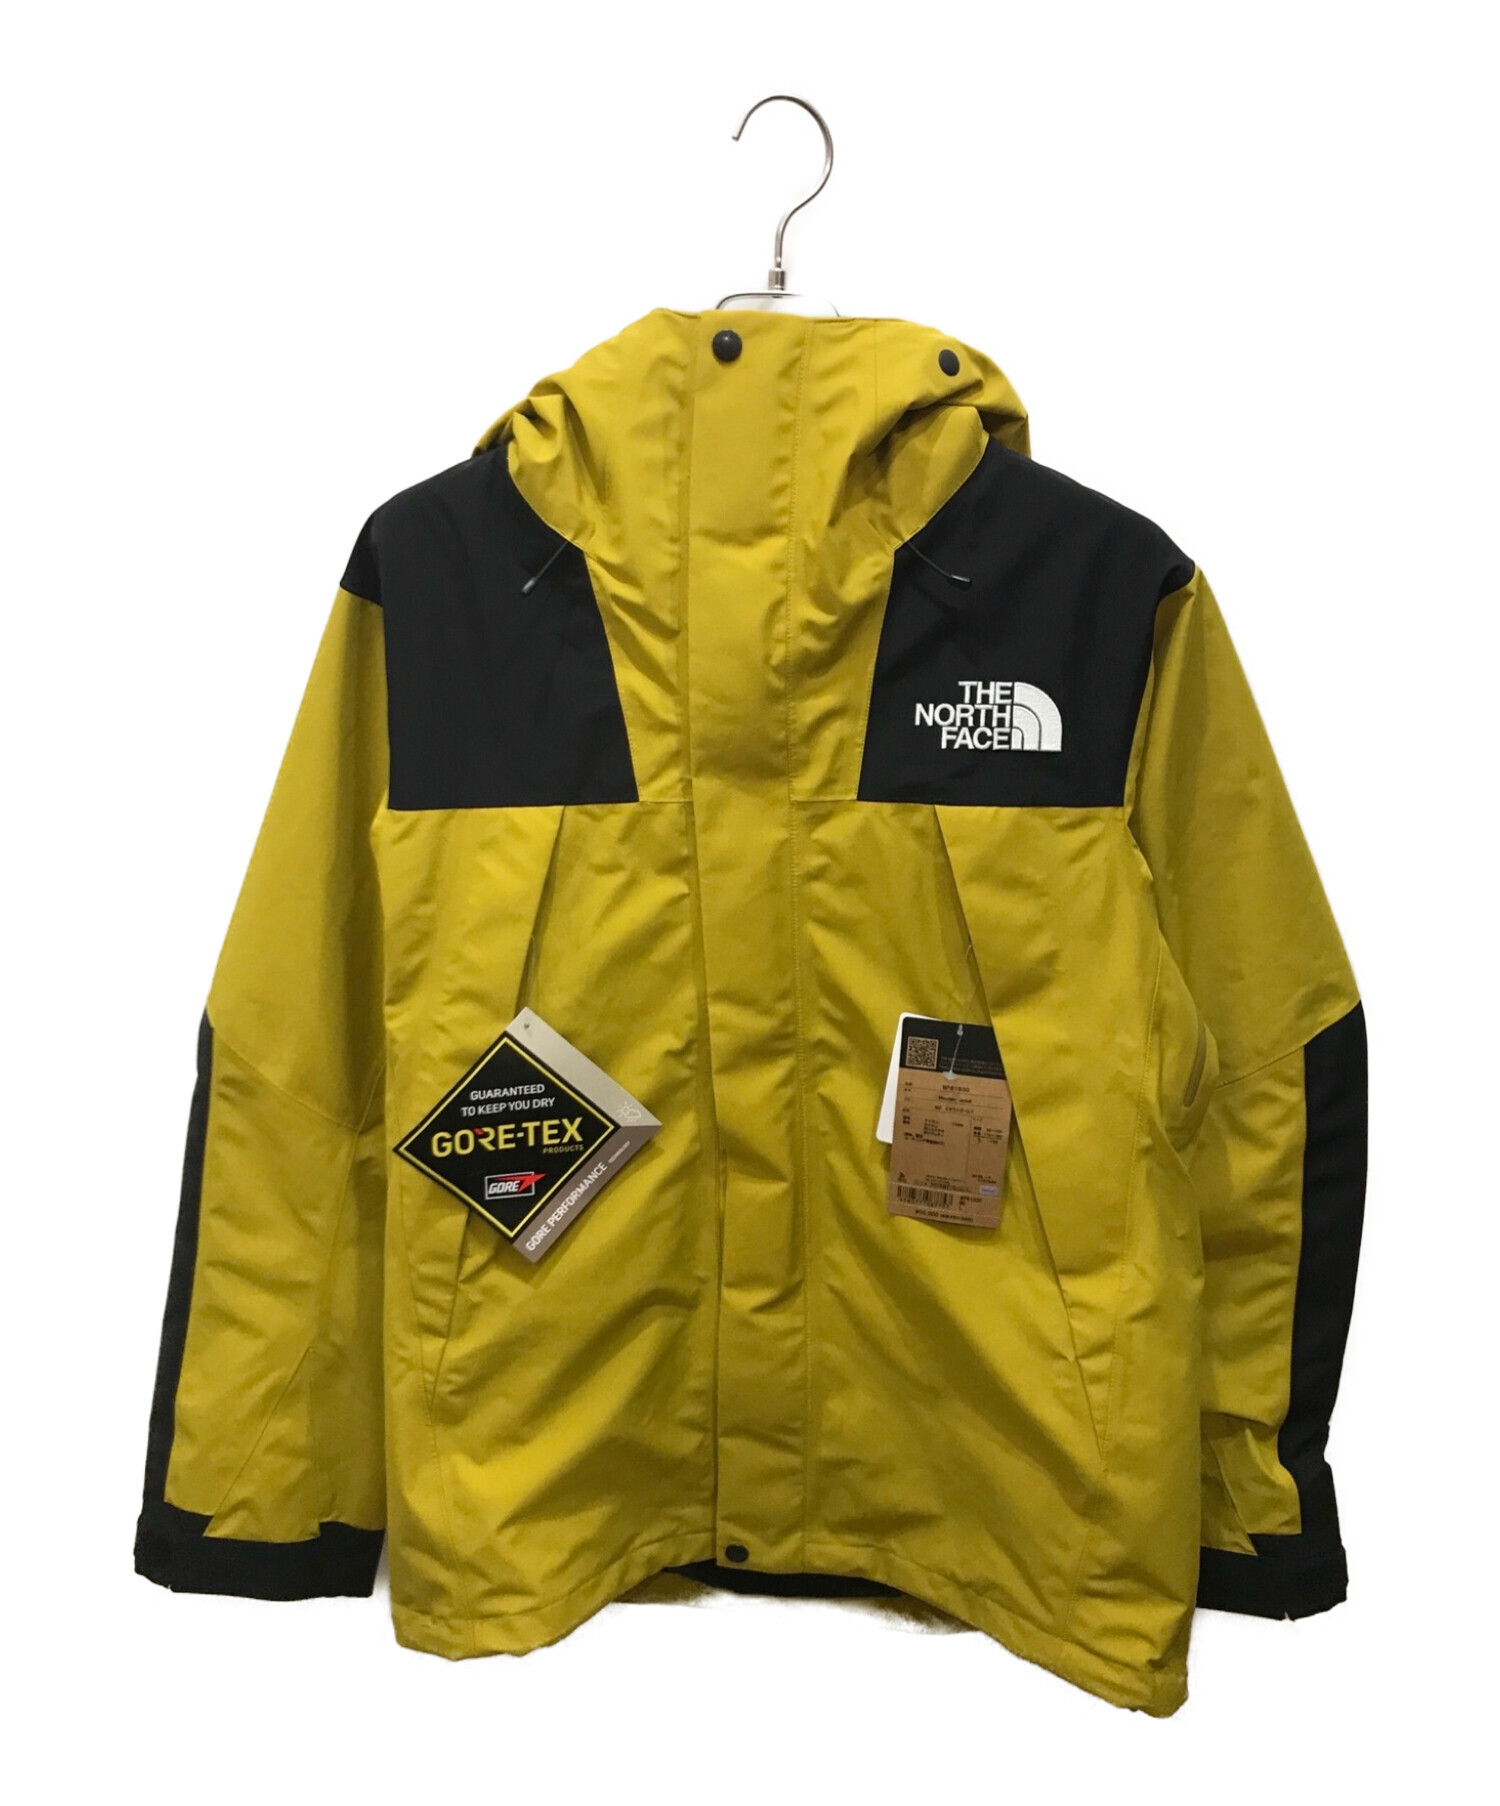 THE NORTH FACE  イエローコート